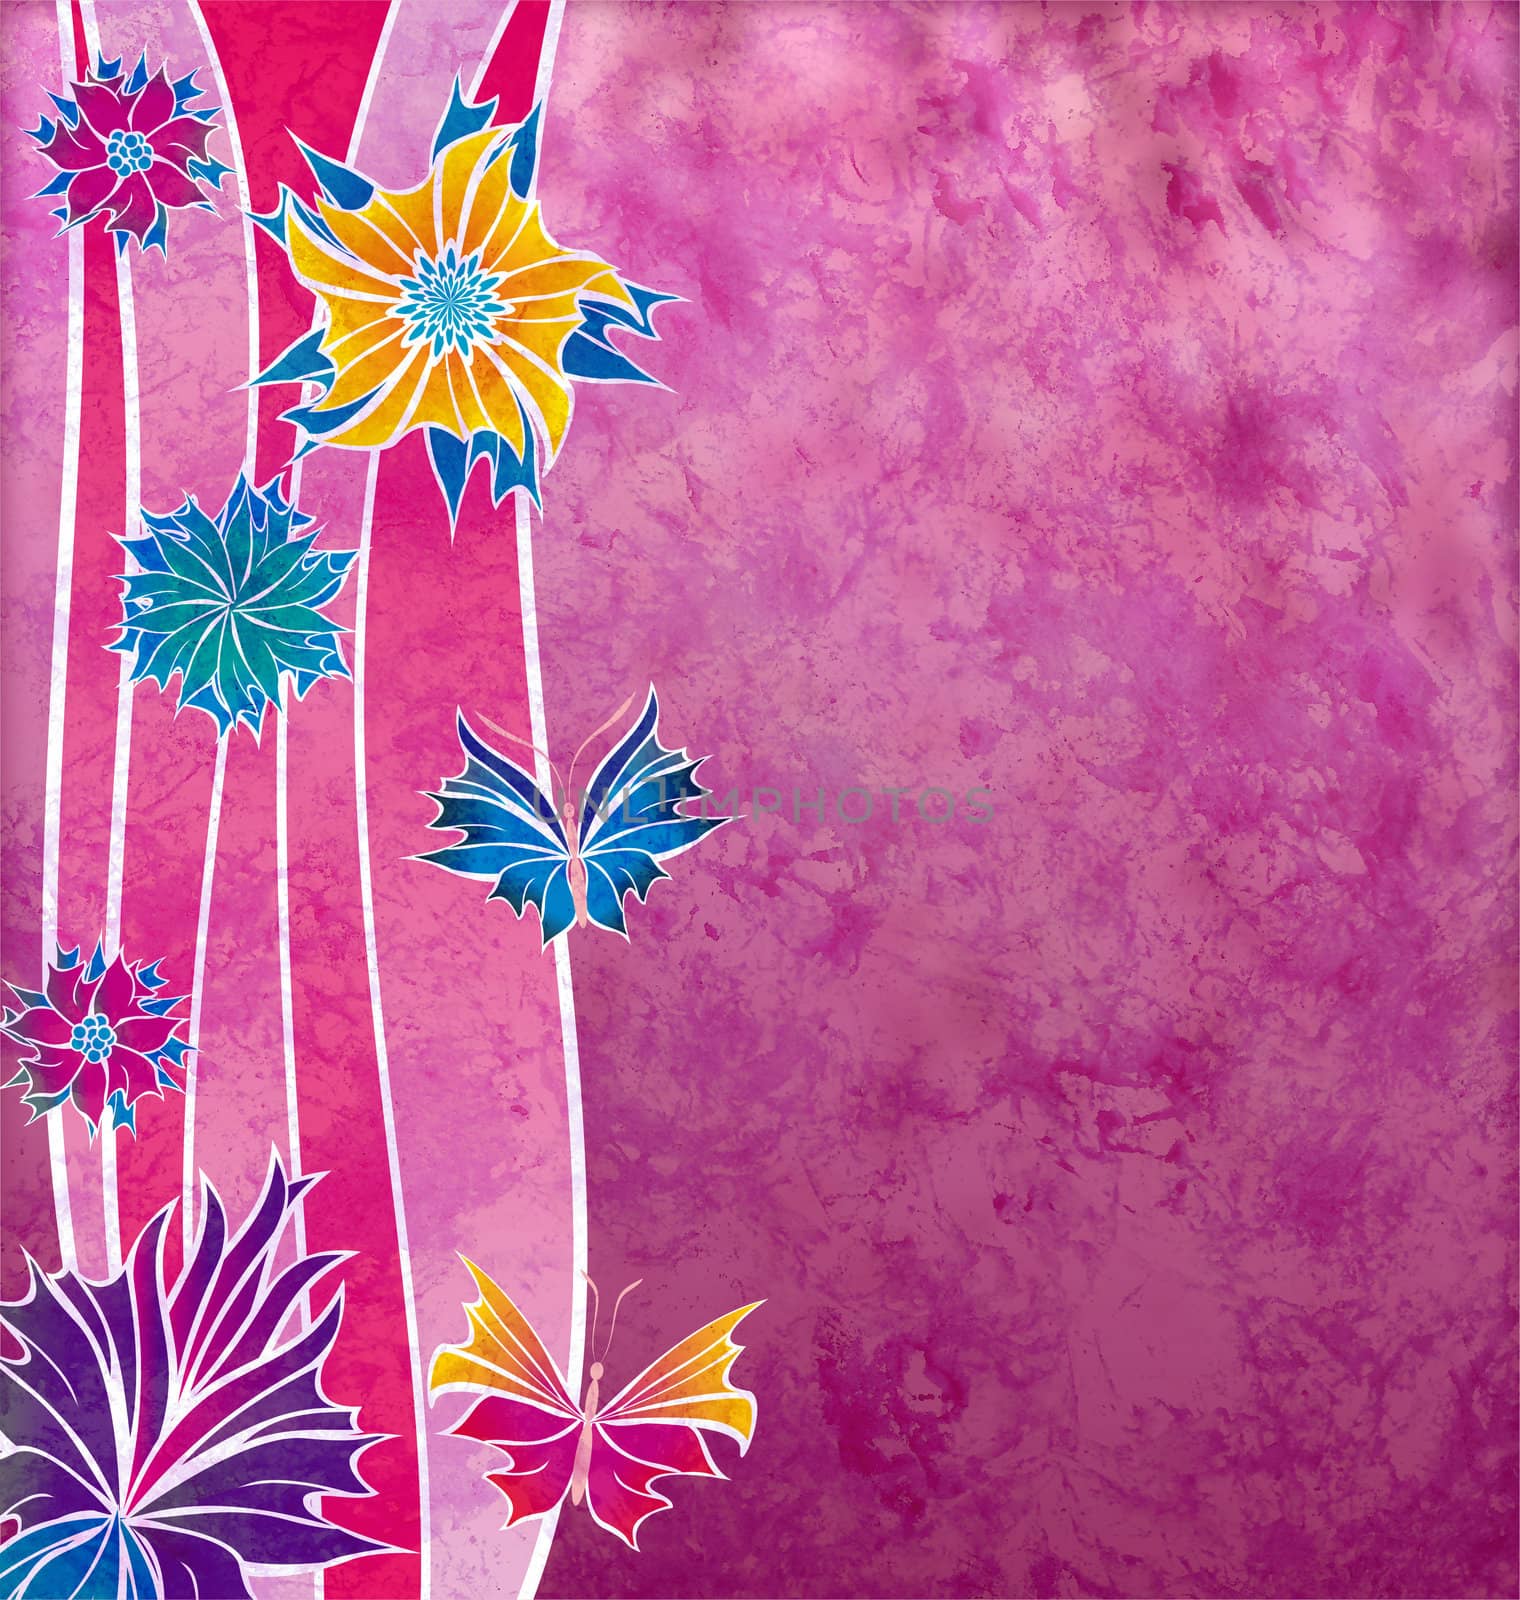 decorative magenta flowers with wave shapes and grunge effect by CherJu